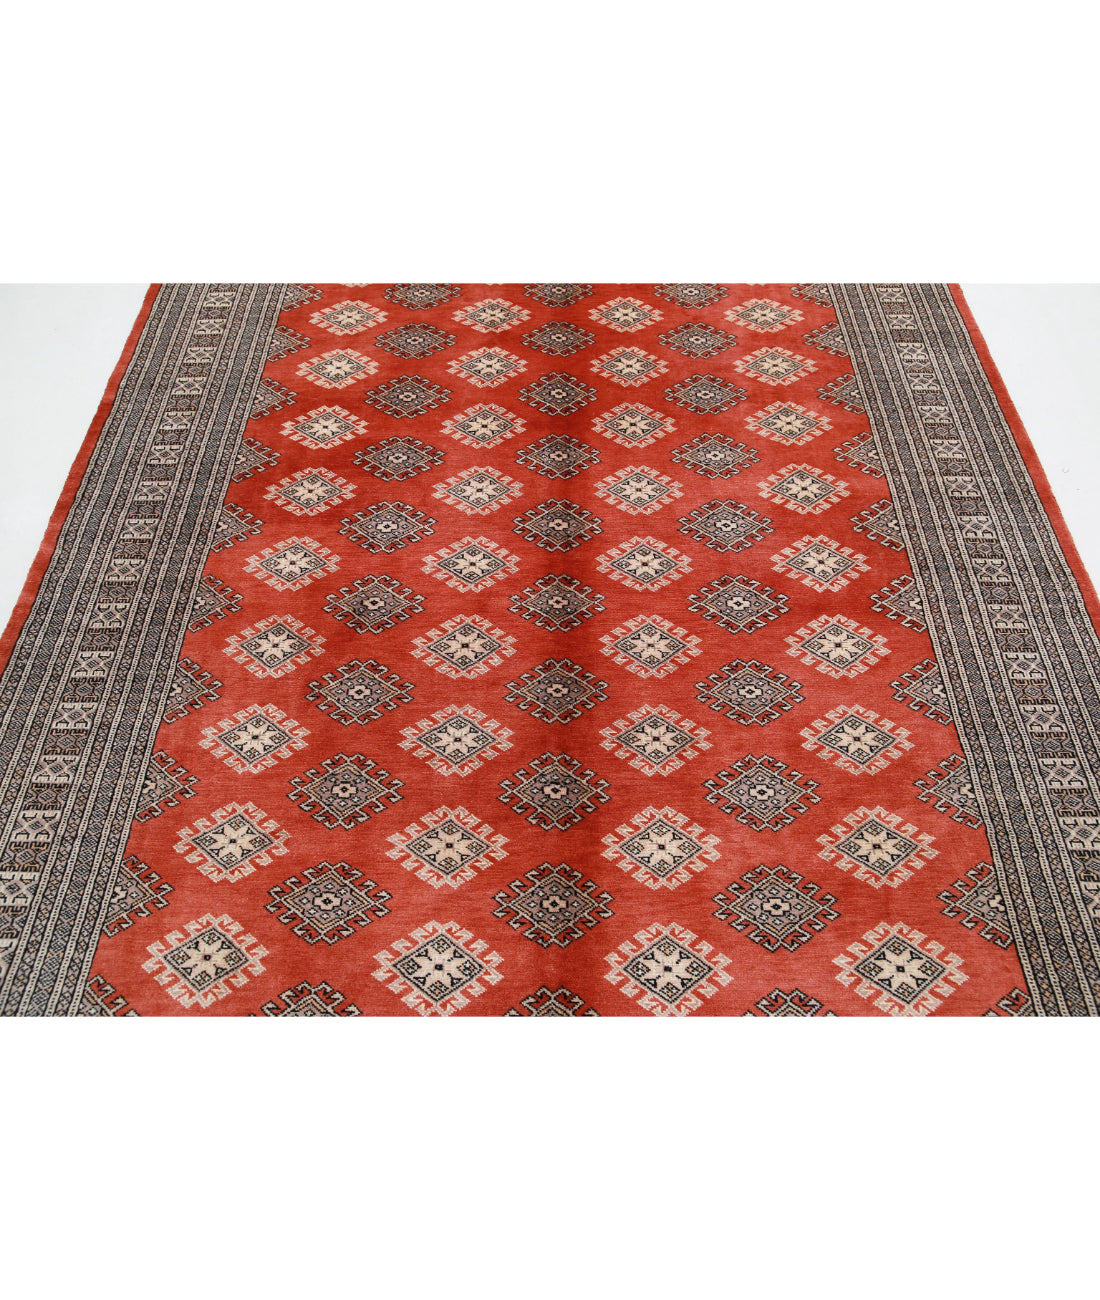 Hand Knotted Tribal Bokhara Wool Rug - 6'6'' x 10'0'' 6'6'' x 10'0'' (195 X 300) / Rust / Taupe